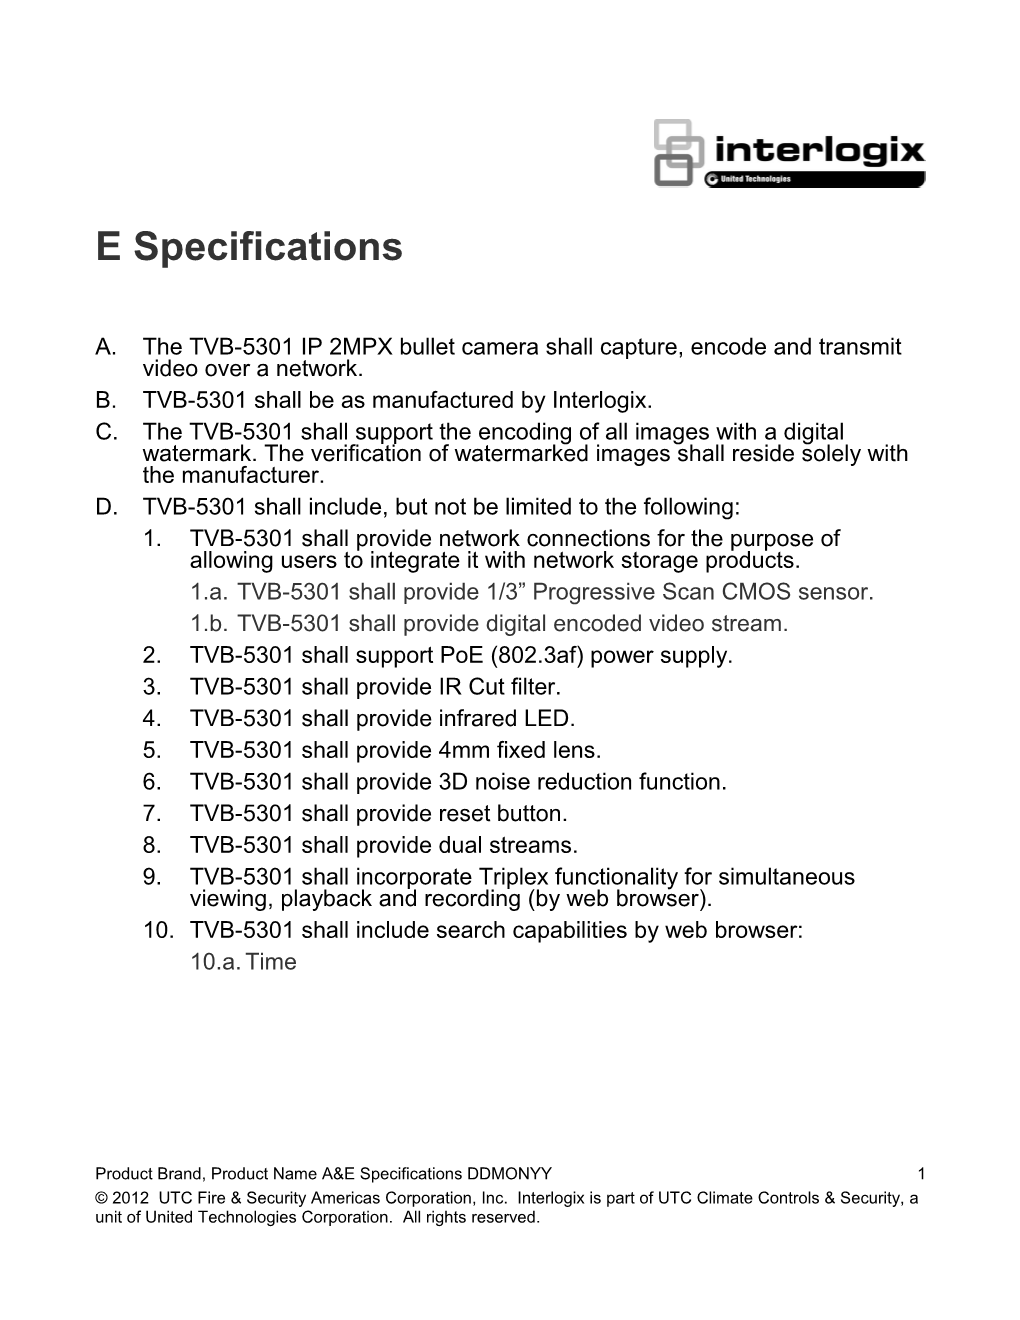 TVB-5301 H.264 IP 2MPX Bullet Camera A&E Specifications